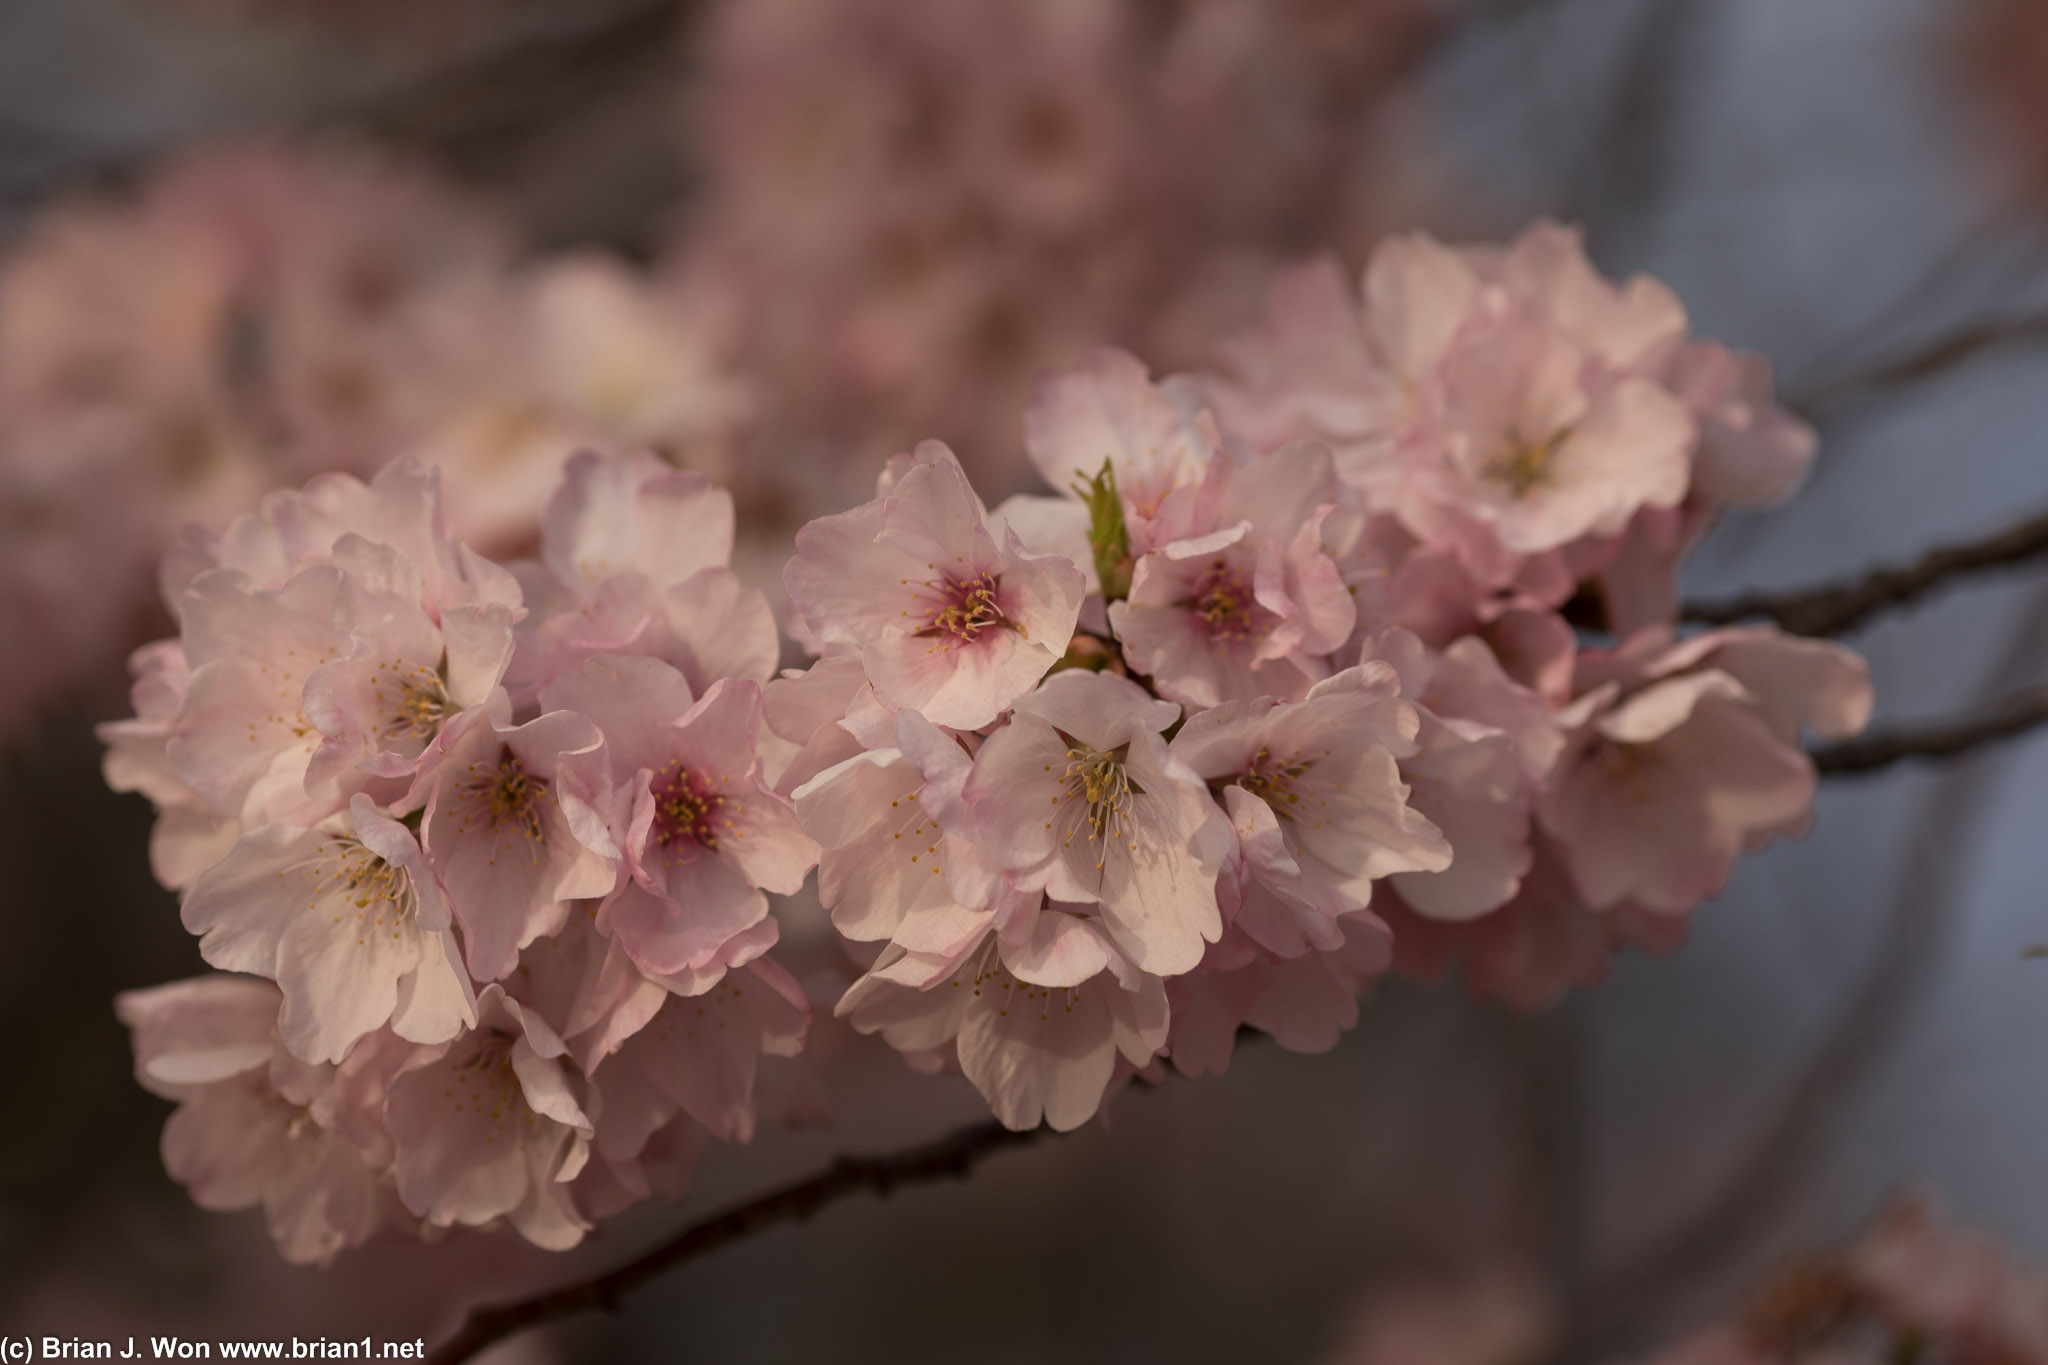 Closer view of a branch full of pink cherry blossoms.